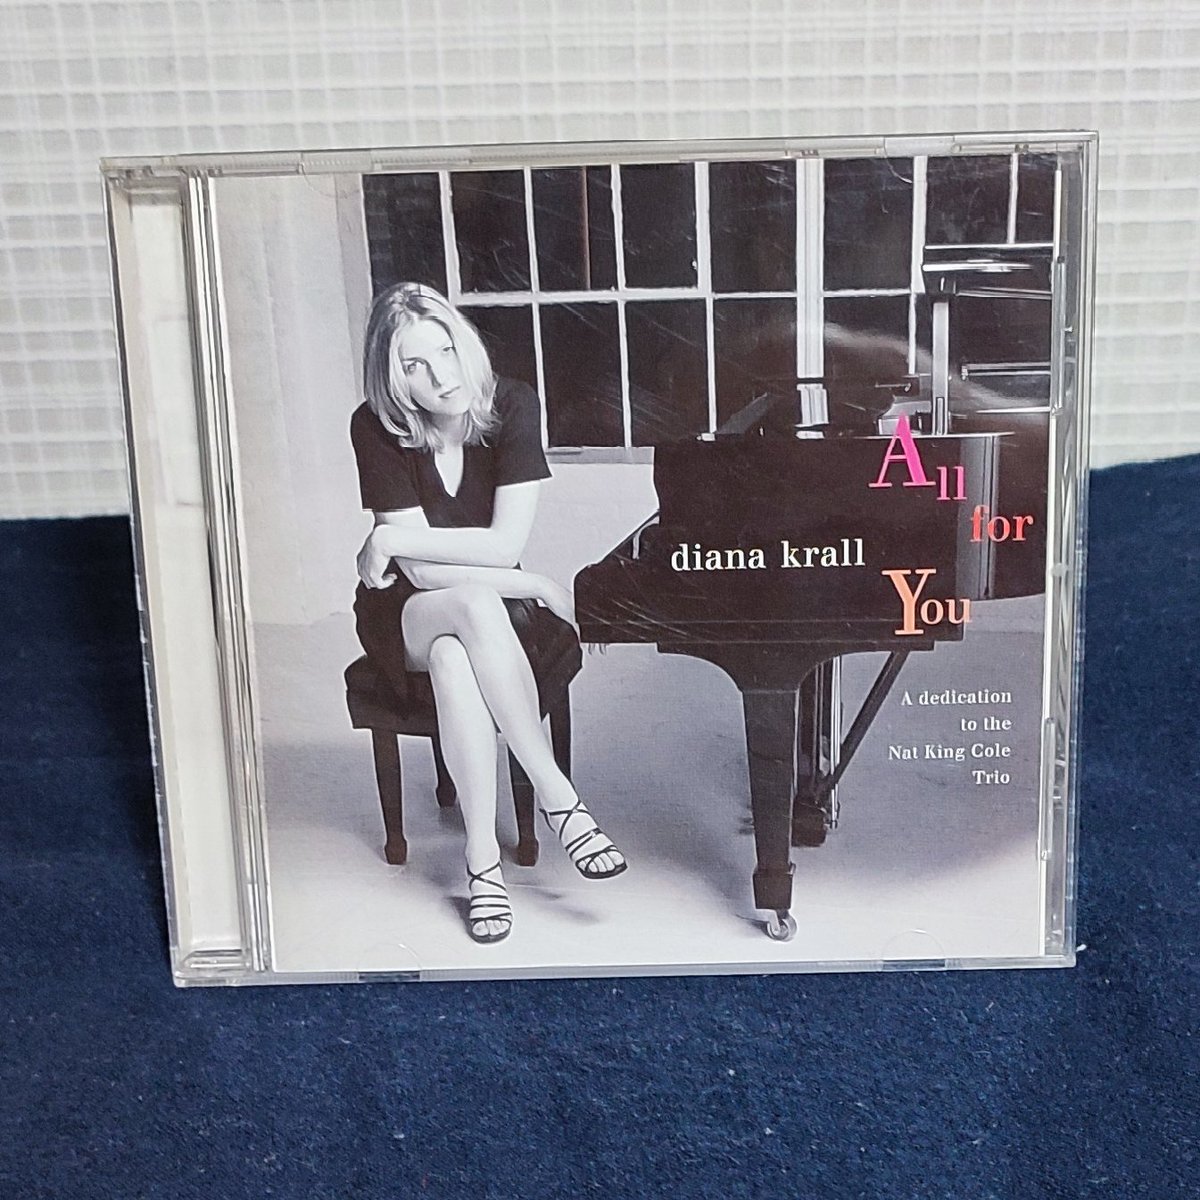 Diana Krall - All For You (A dedication to the Nat King Cole Trio)
#nowspinning #compactdisc